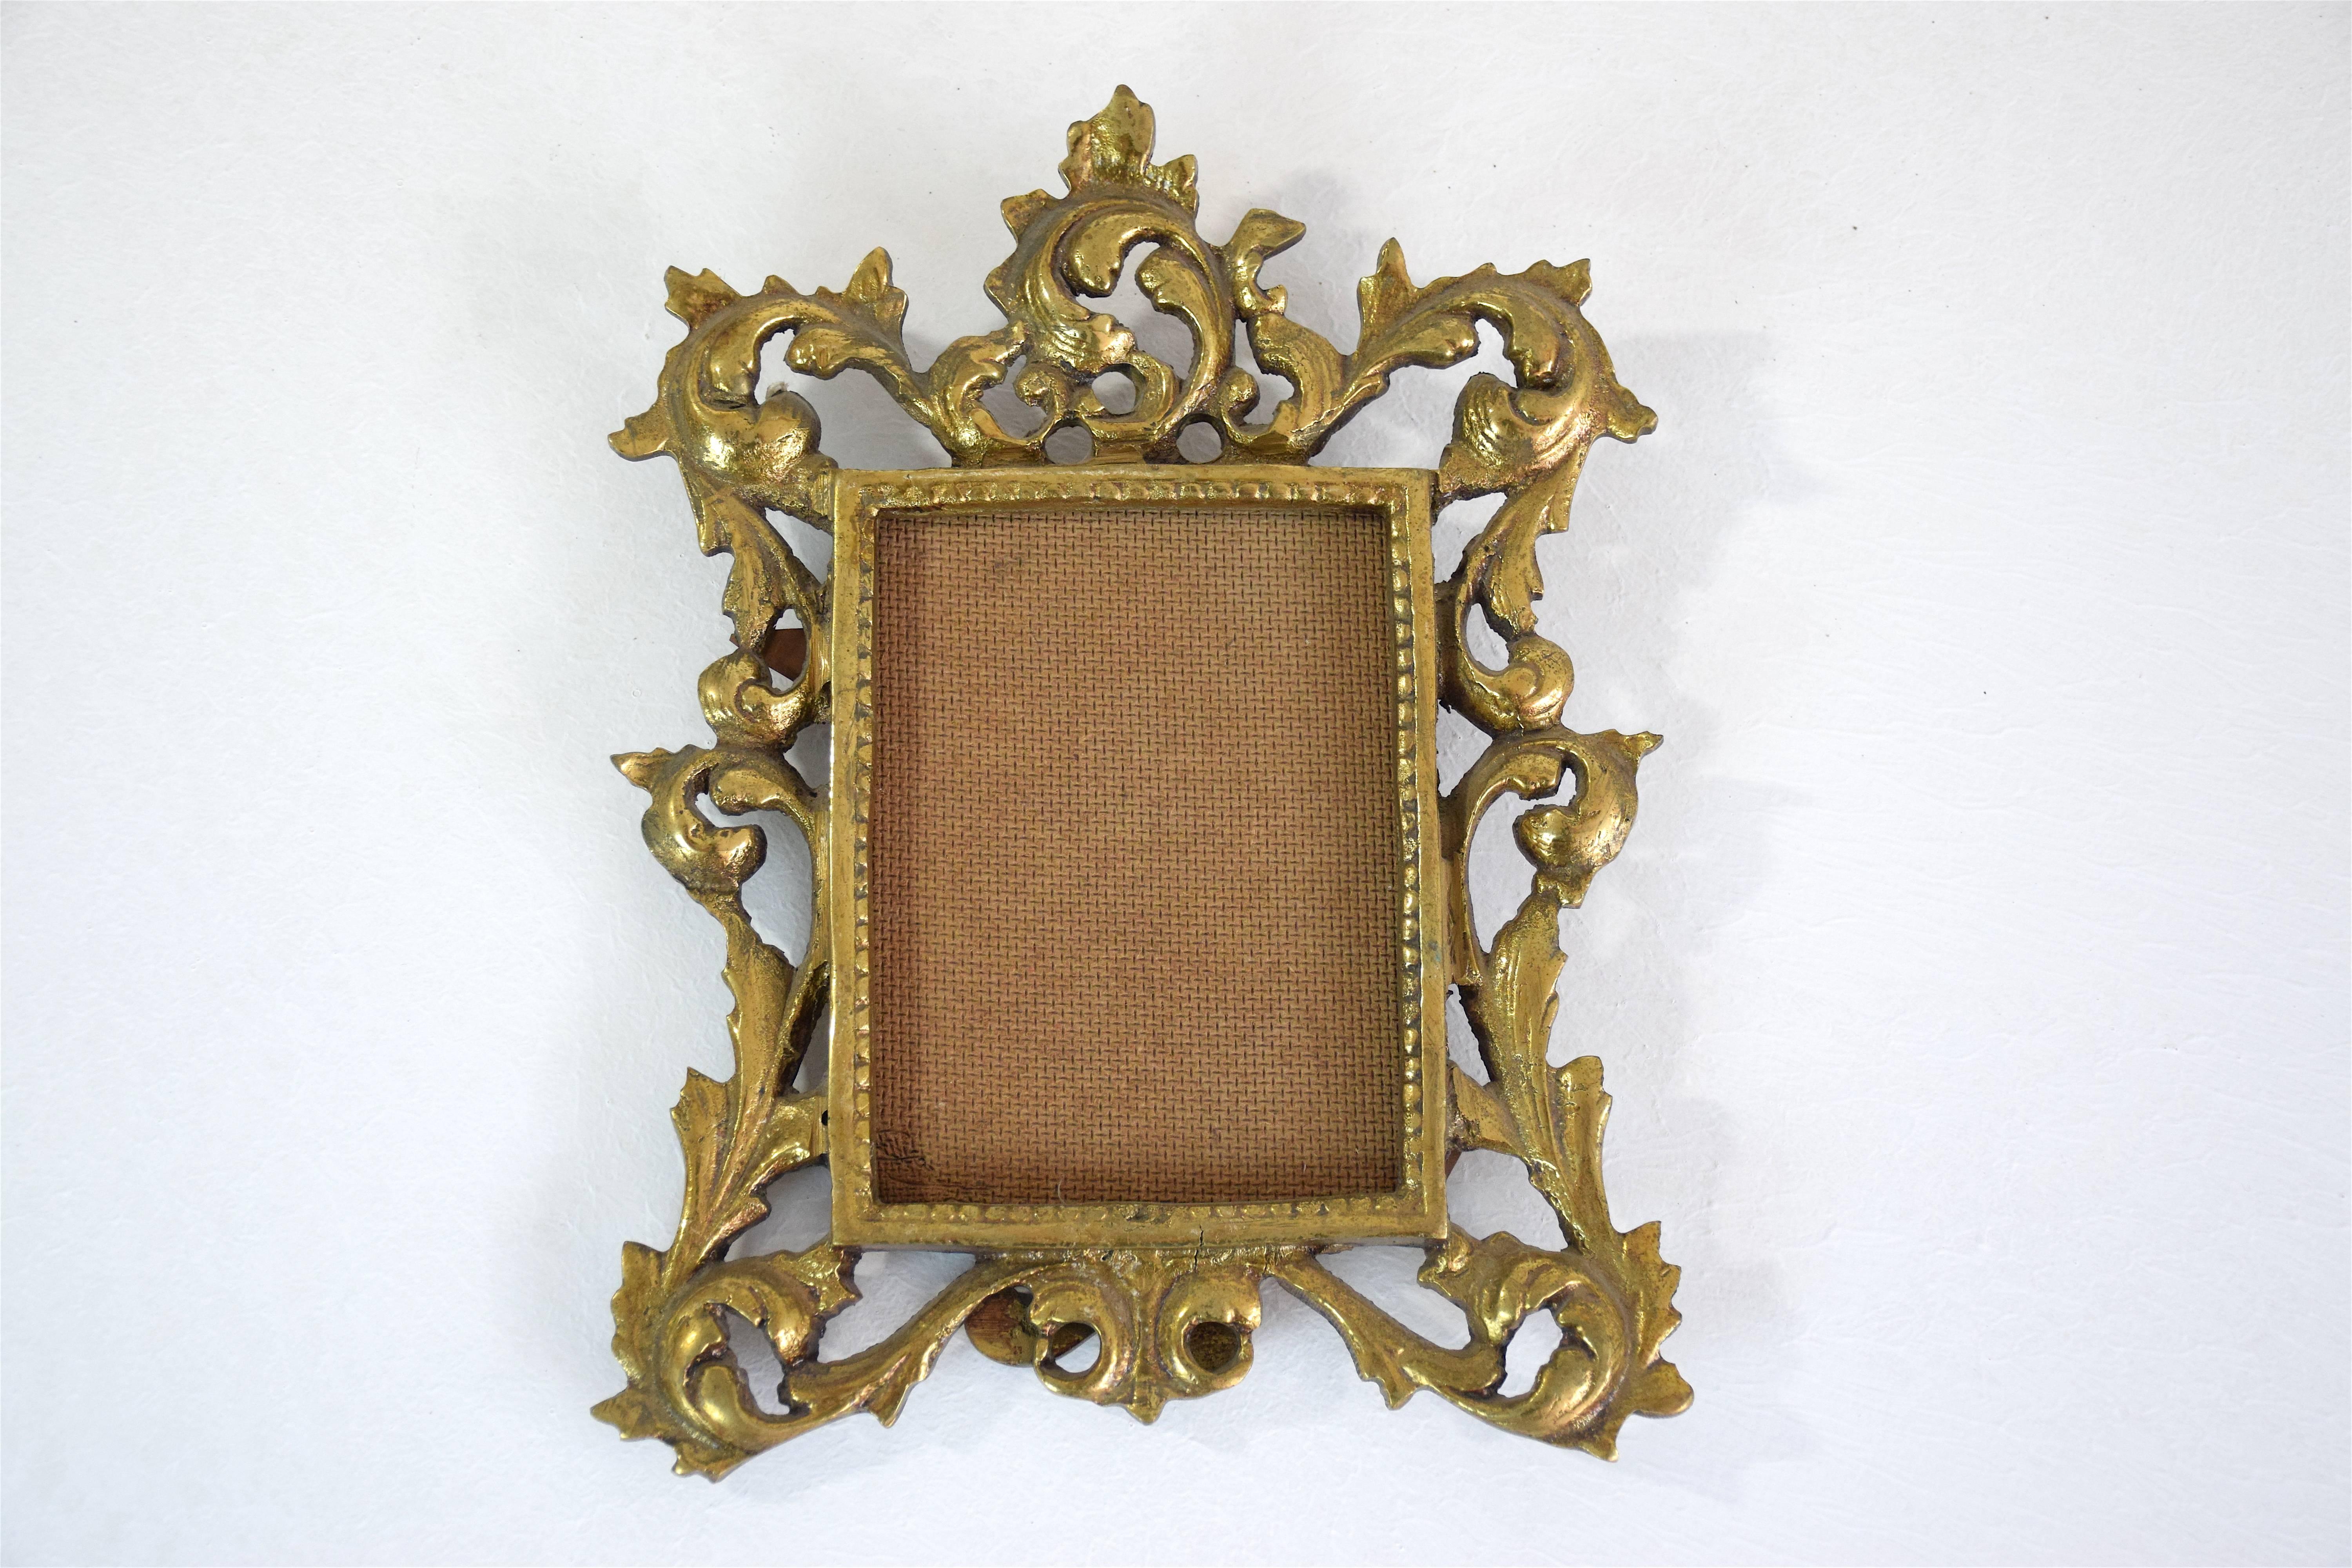 Gilded bronze picture frame of beautiful craftsmanship estimated from early 20th century Victorian England in Rococo style.